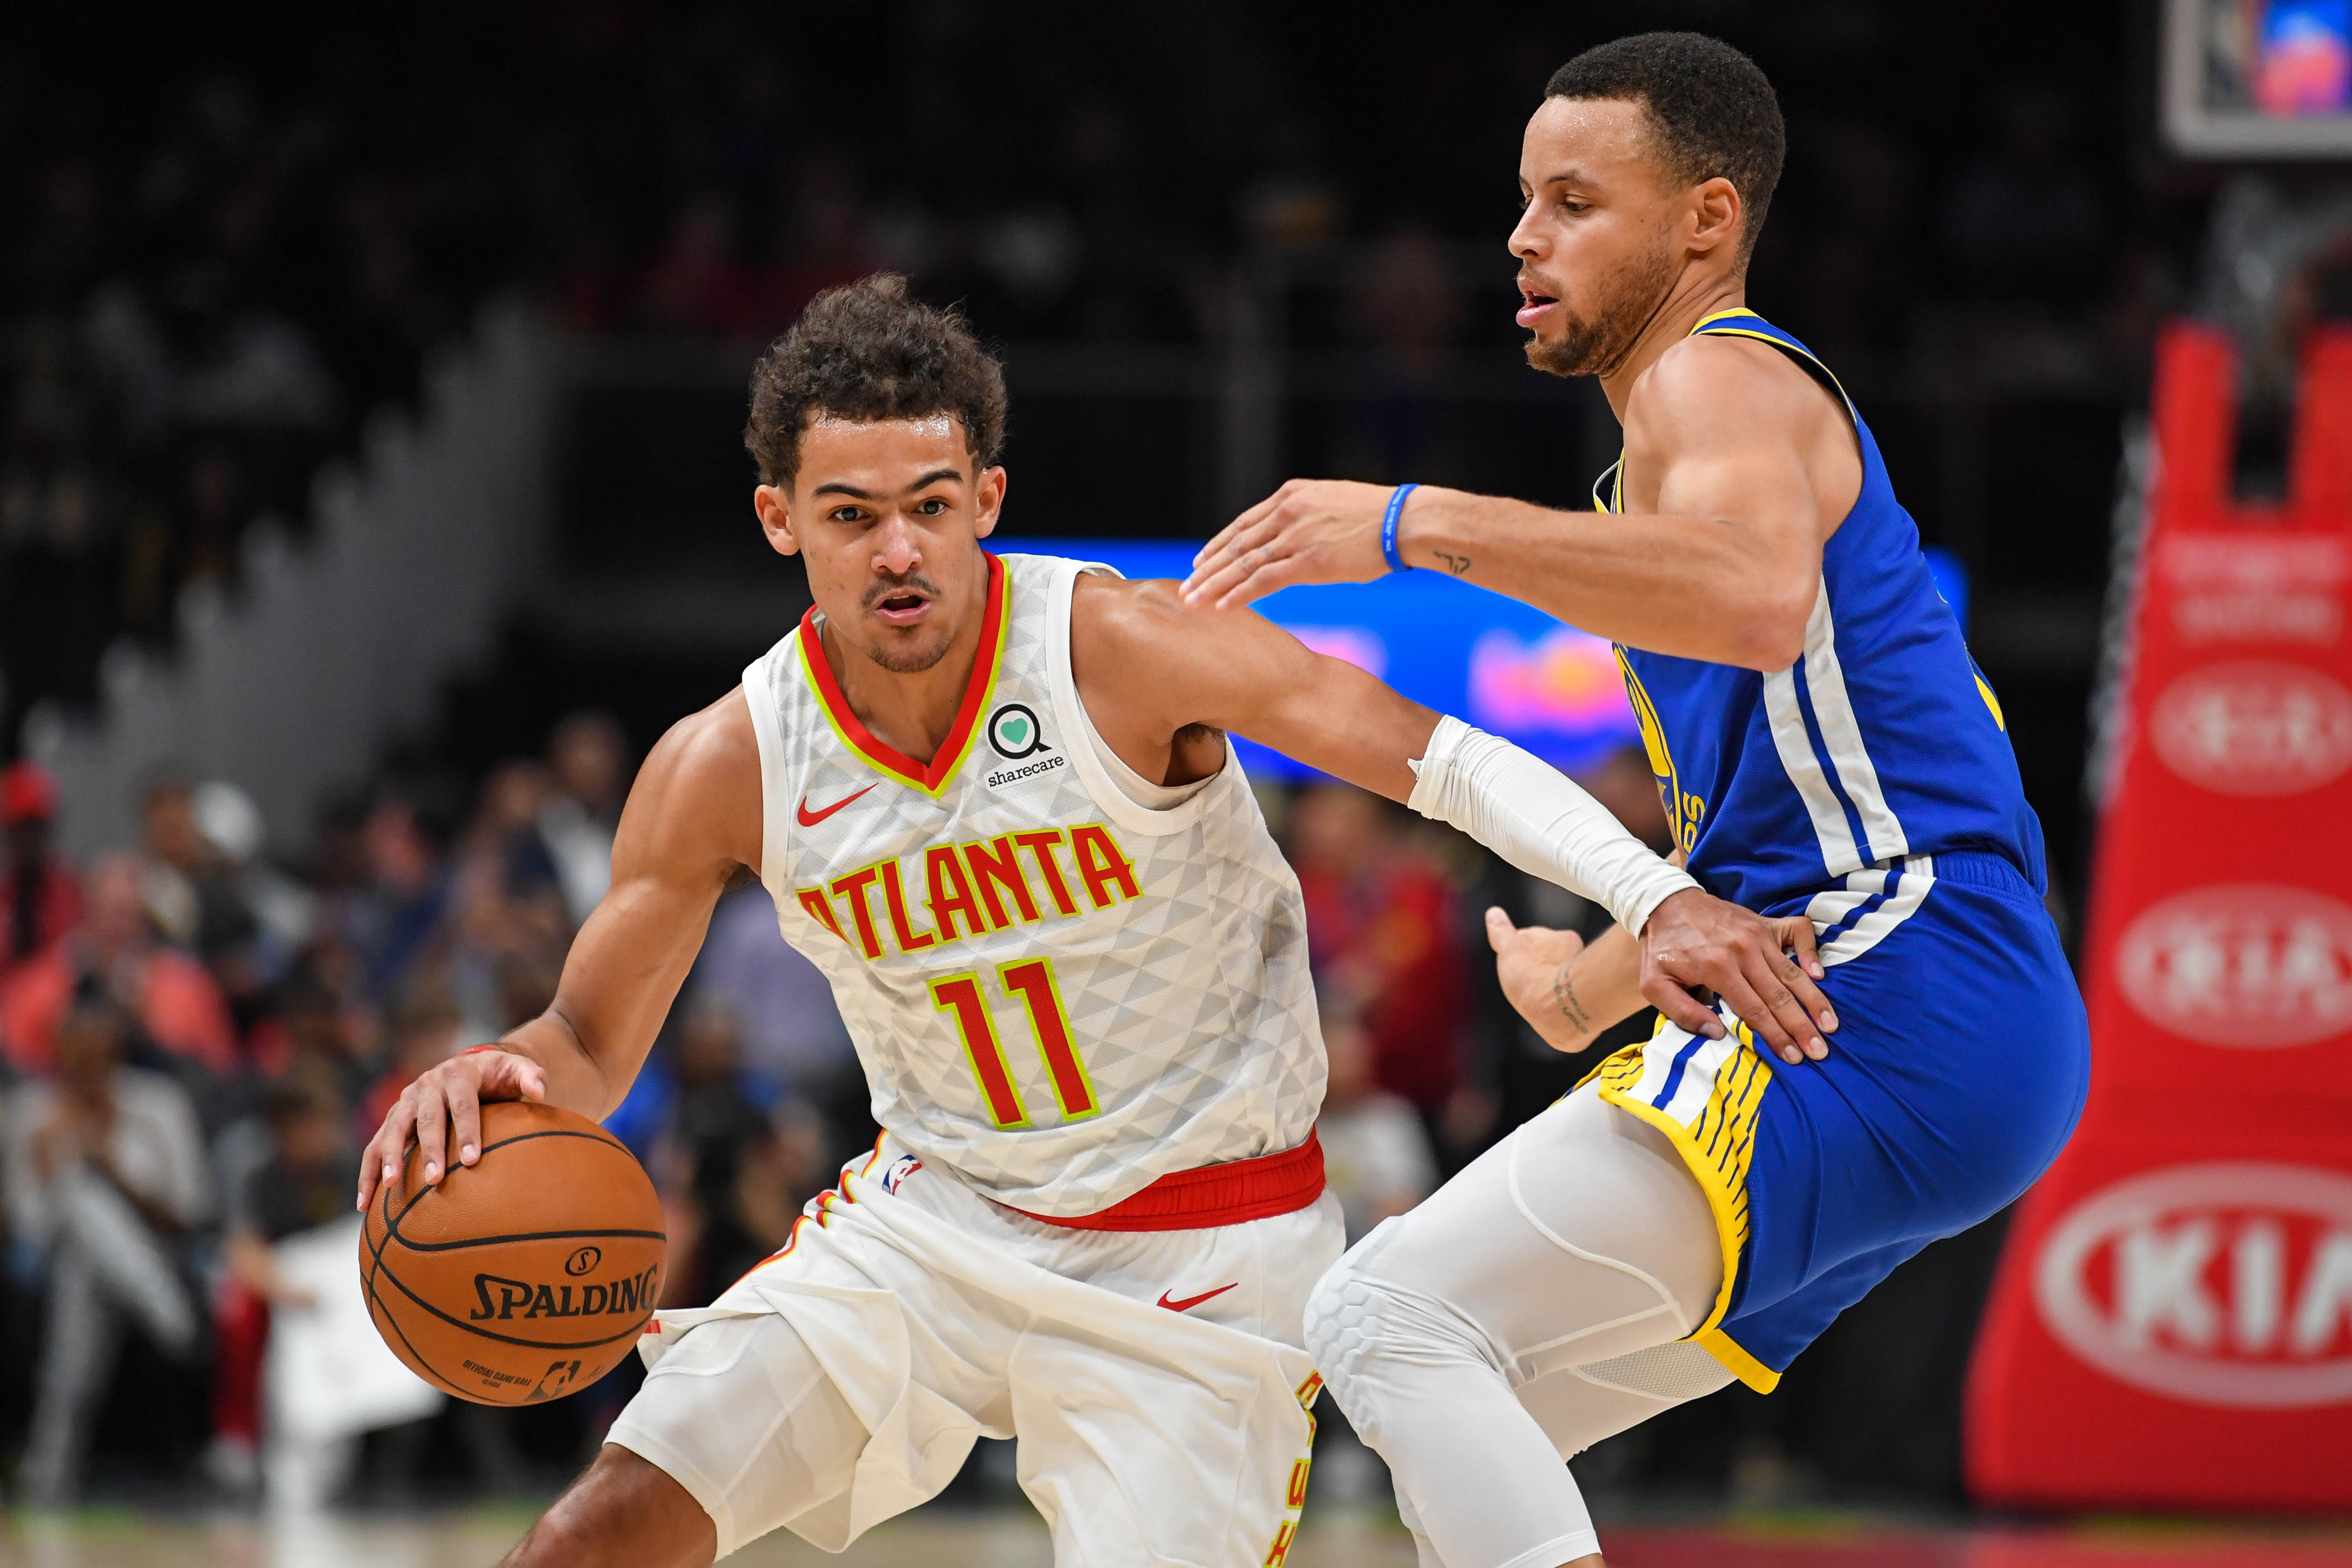 Atlanta Hawks guard Trae Young (11) works against Golden State Warriors guard Stephen Curry (30) during the second half at State Farm Arena.